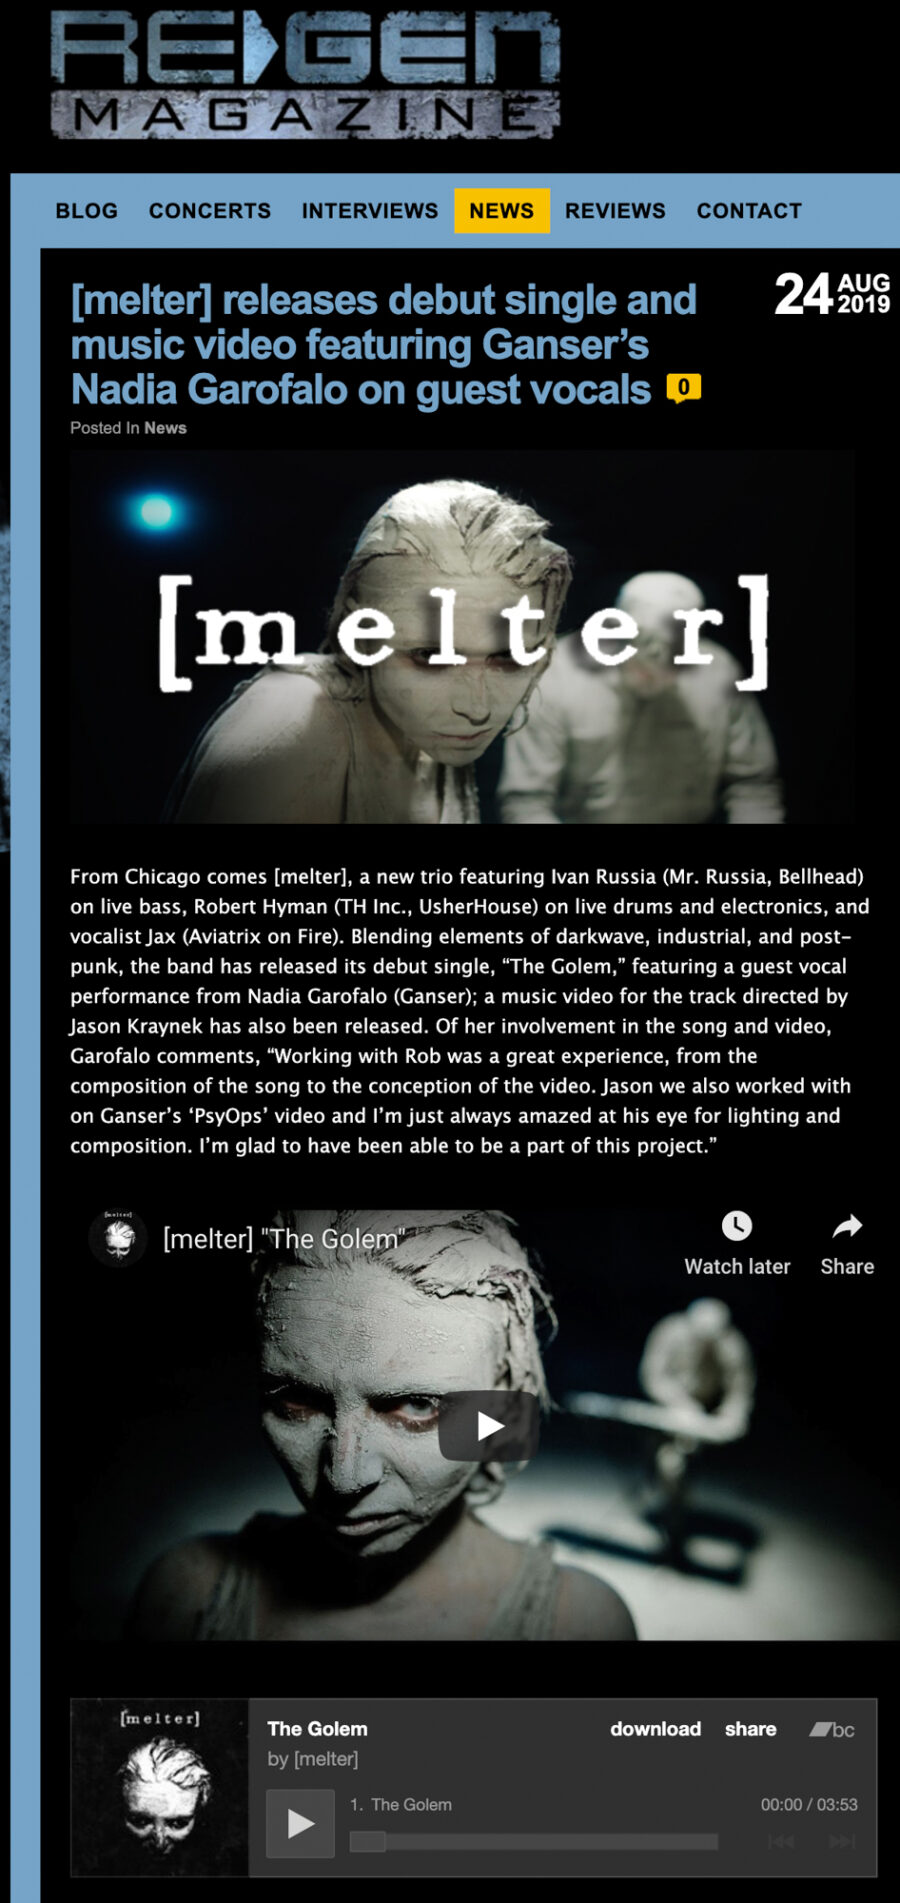 Press article by Regen magazine for the music video the Golem by the group Melter.